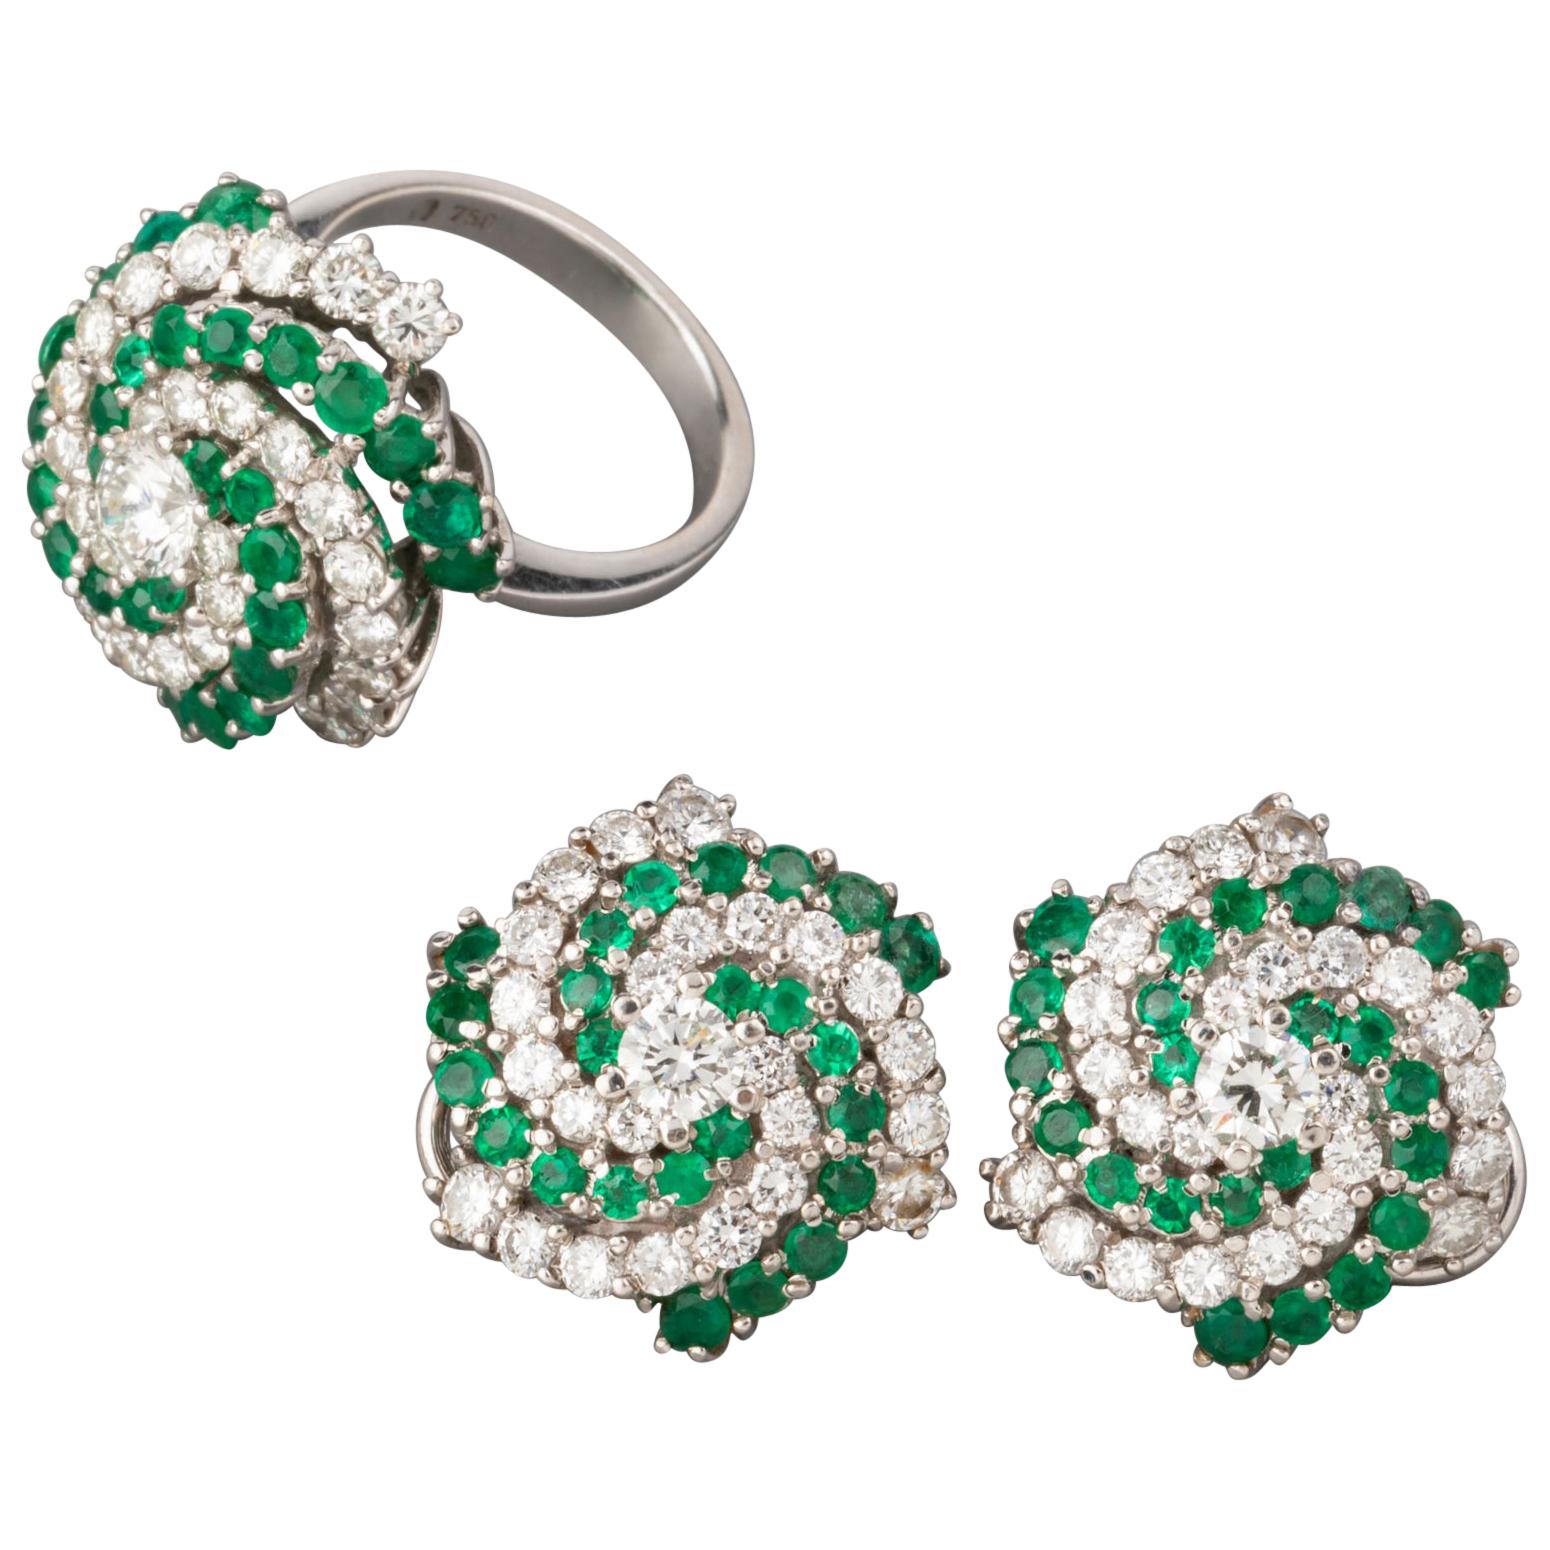 5 Carat Diamonds and 4 Carat Emeralds Ring and Earrings Set